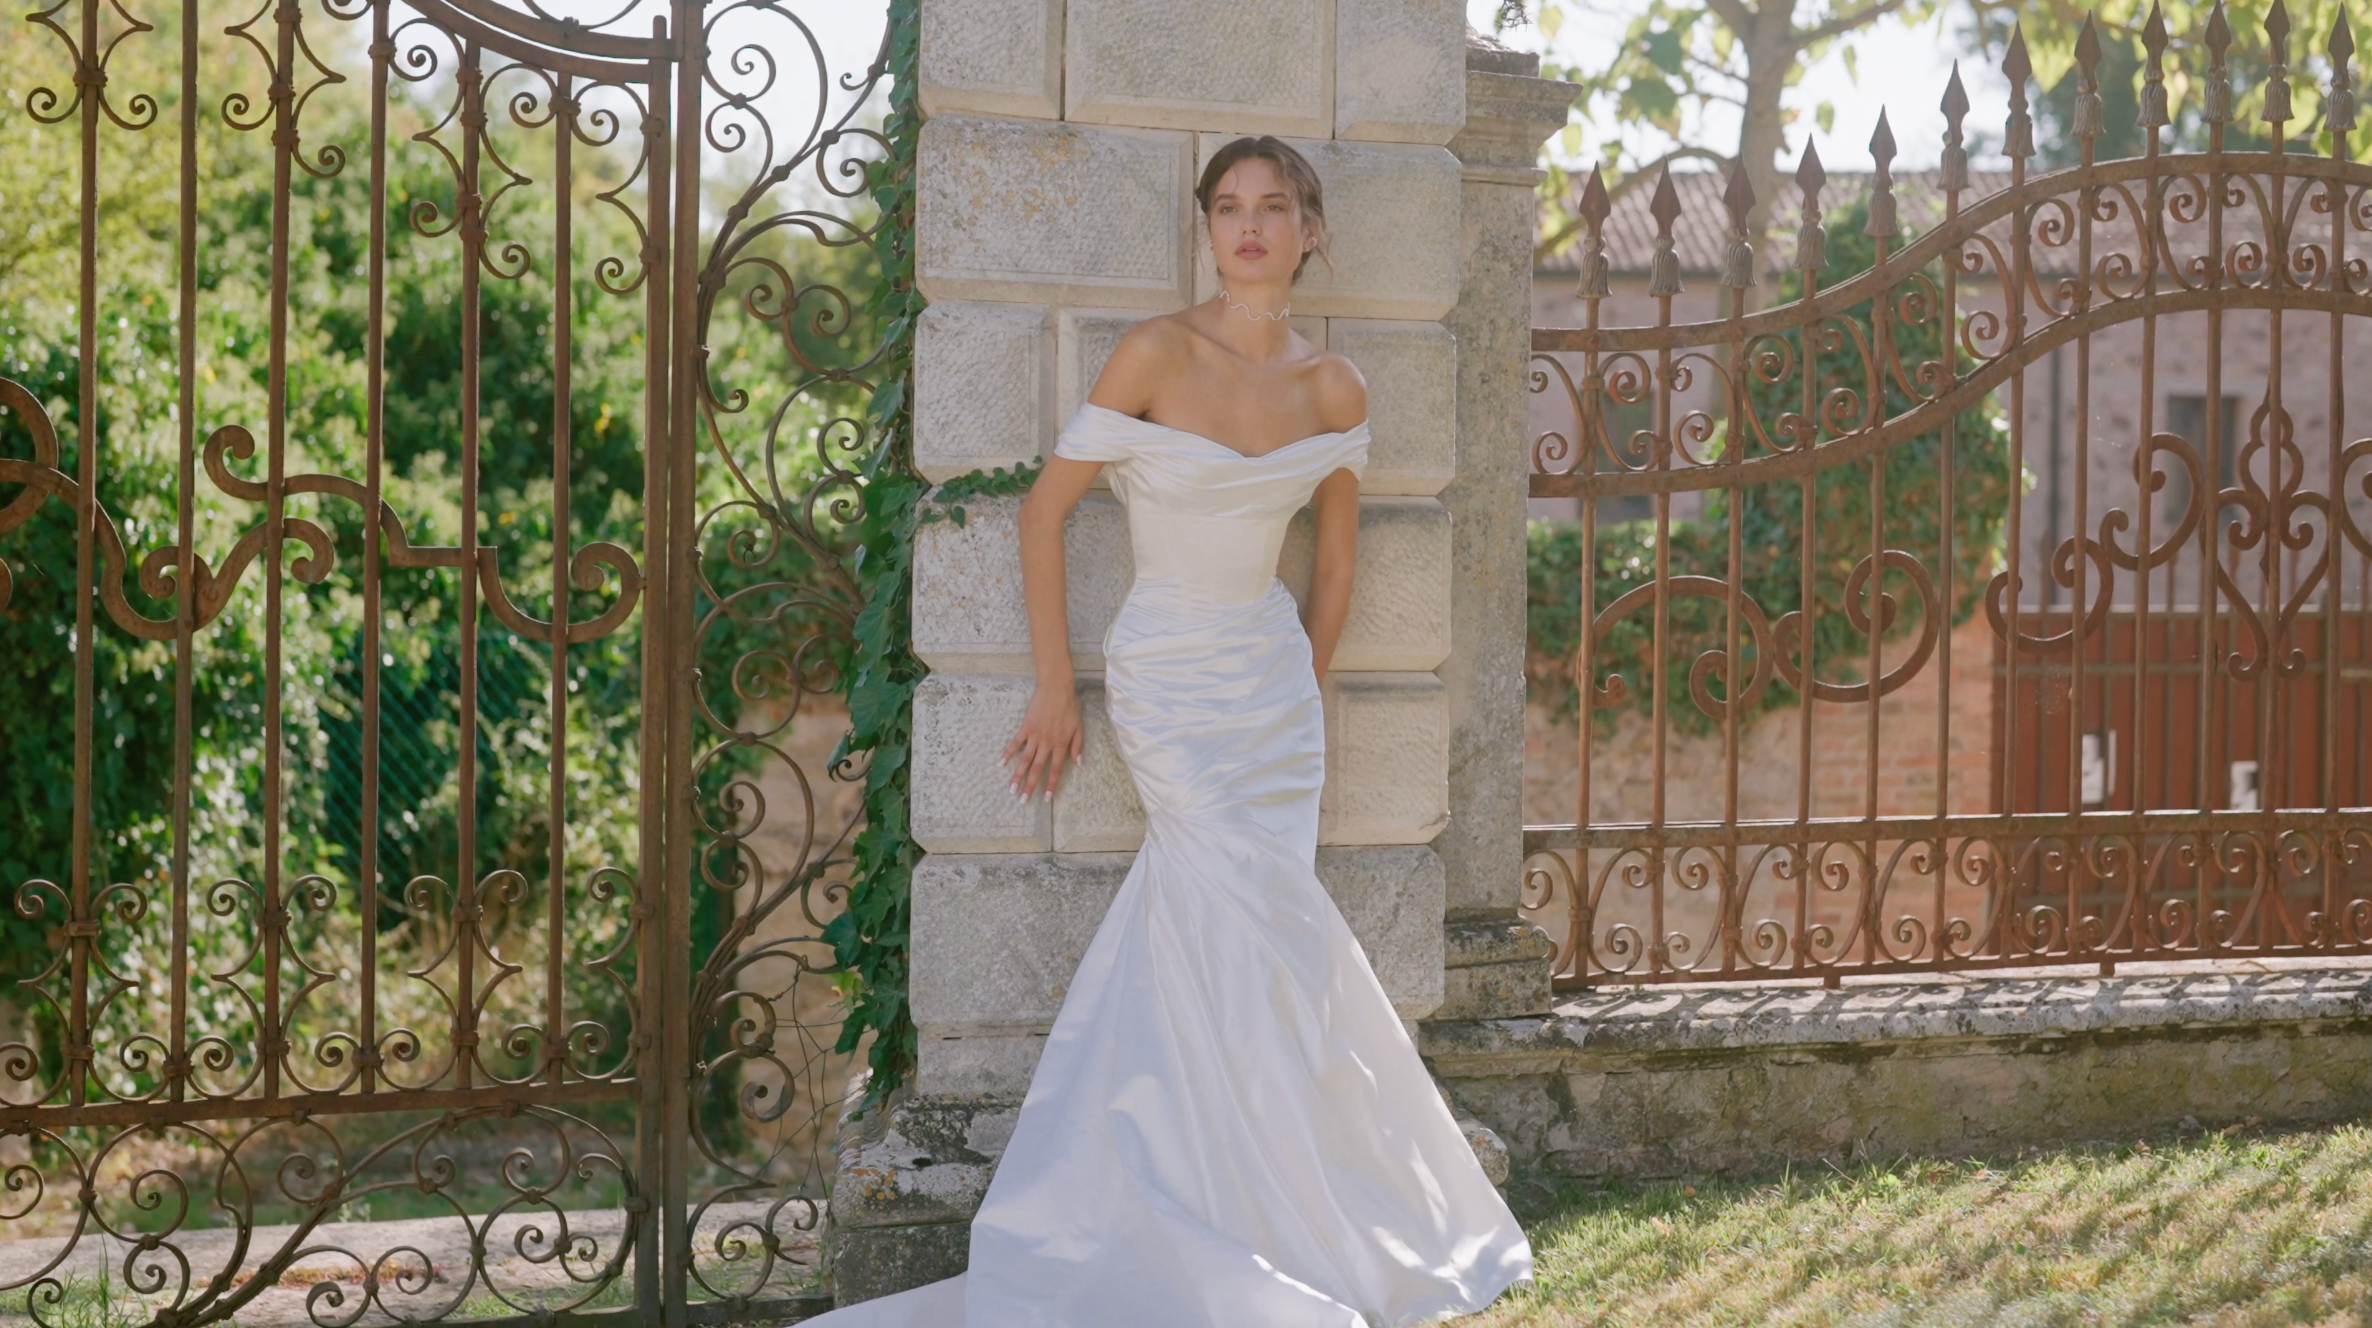 Load video: Transport to a 17th century villa in Veneto, Italy as we showcase the Fall 2024 bridal collection.